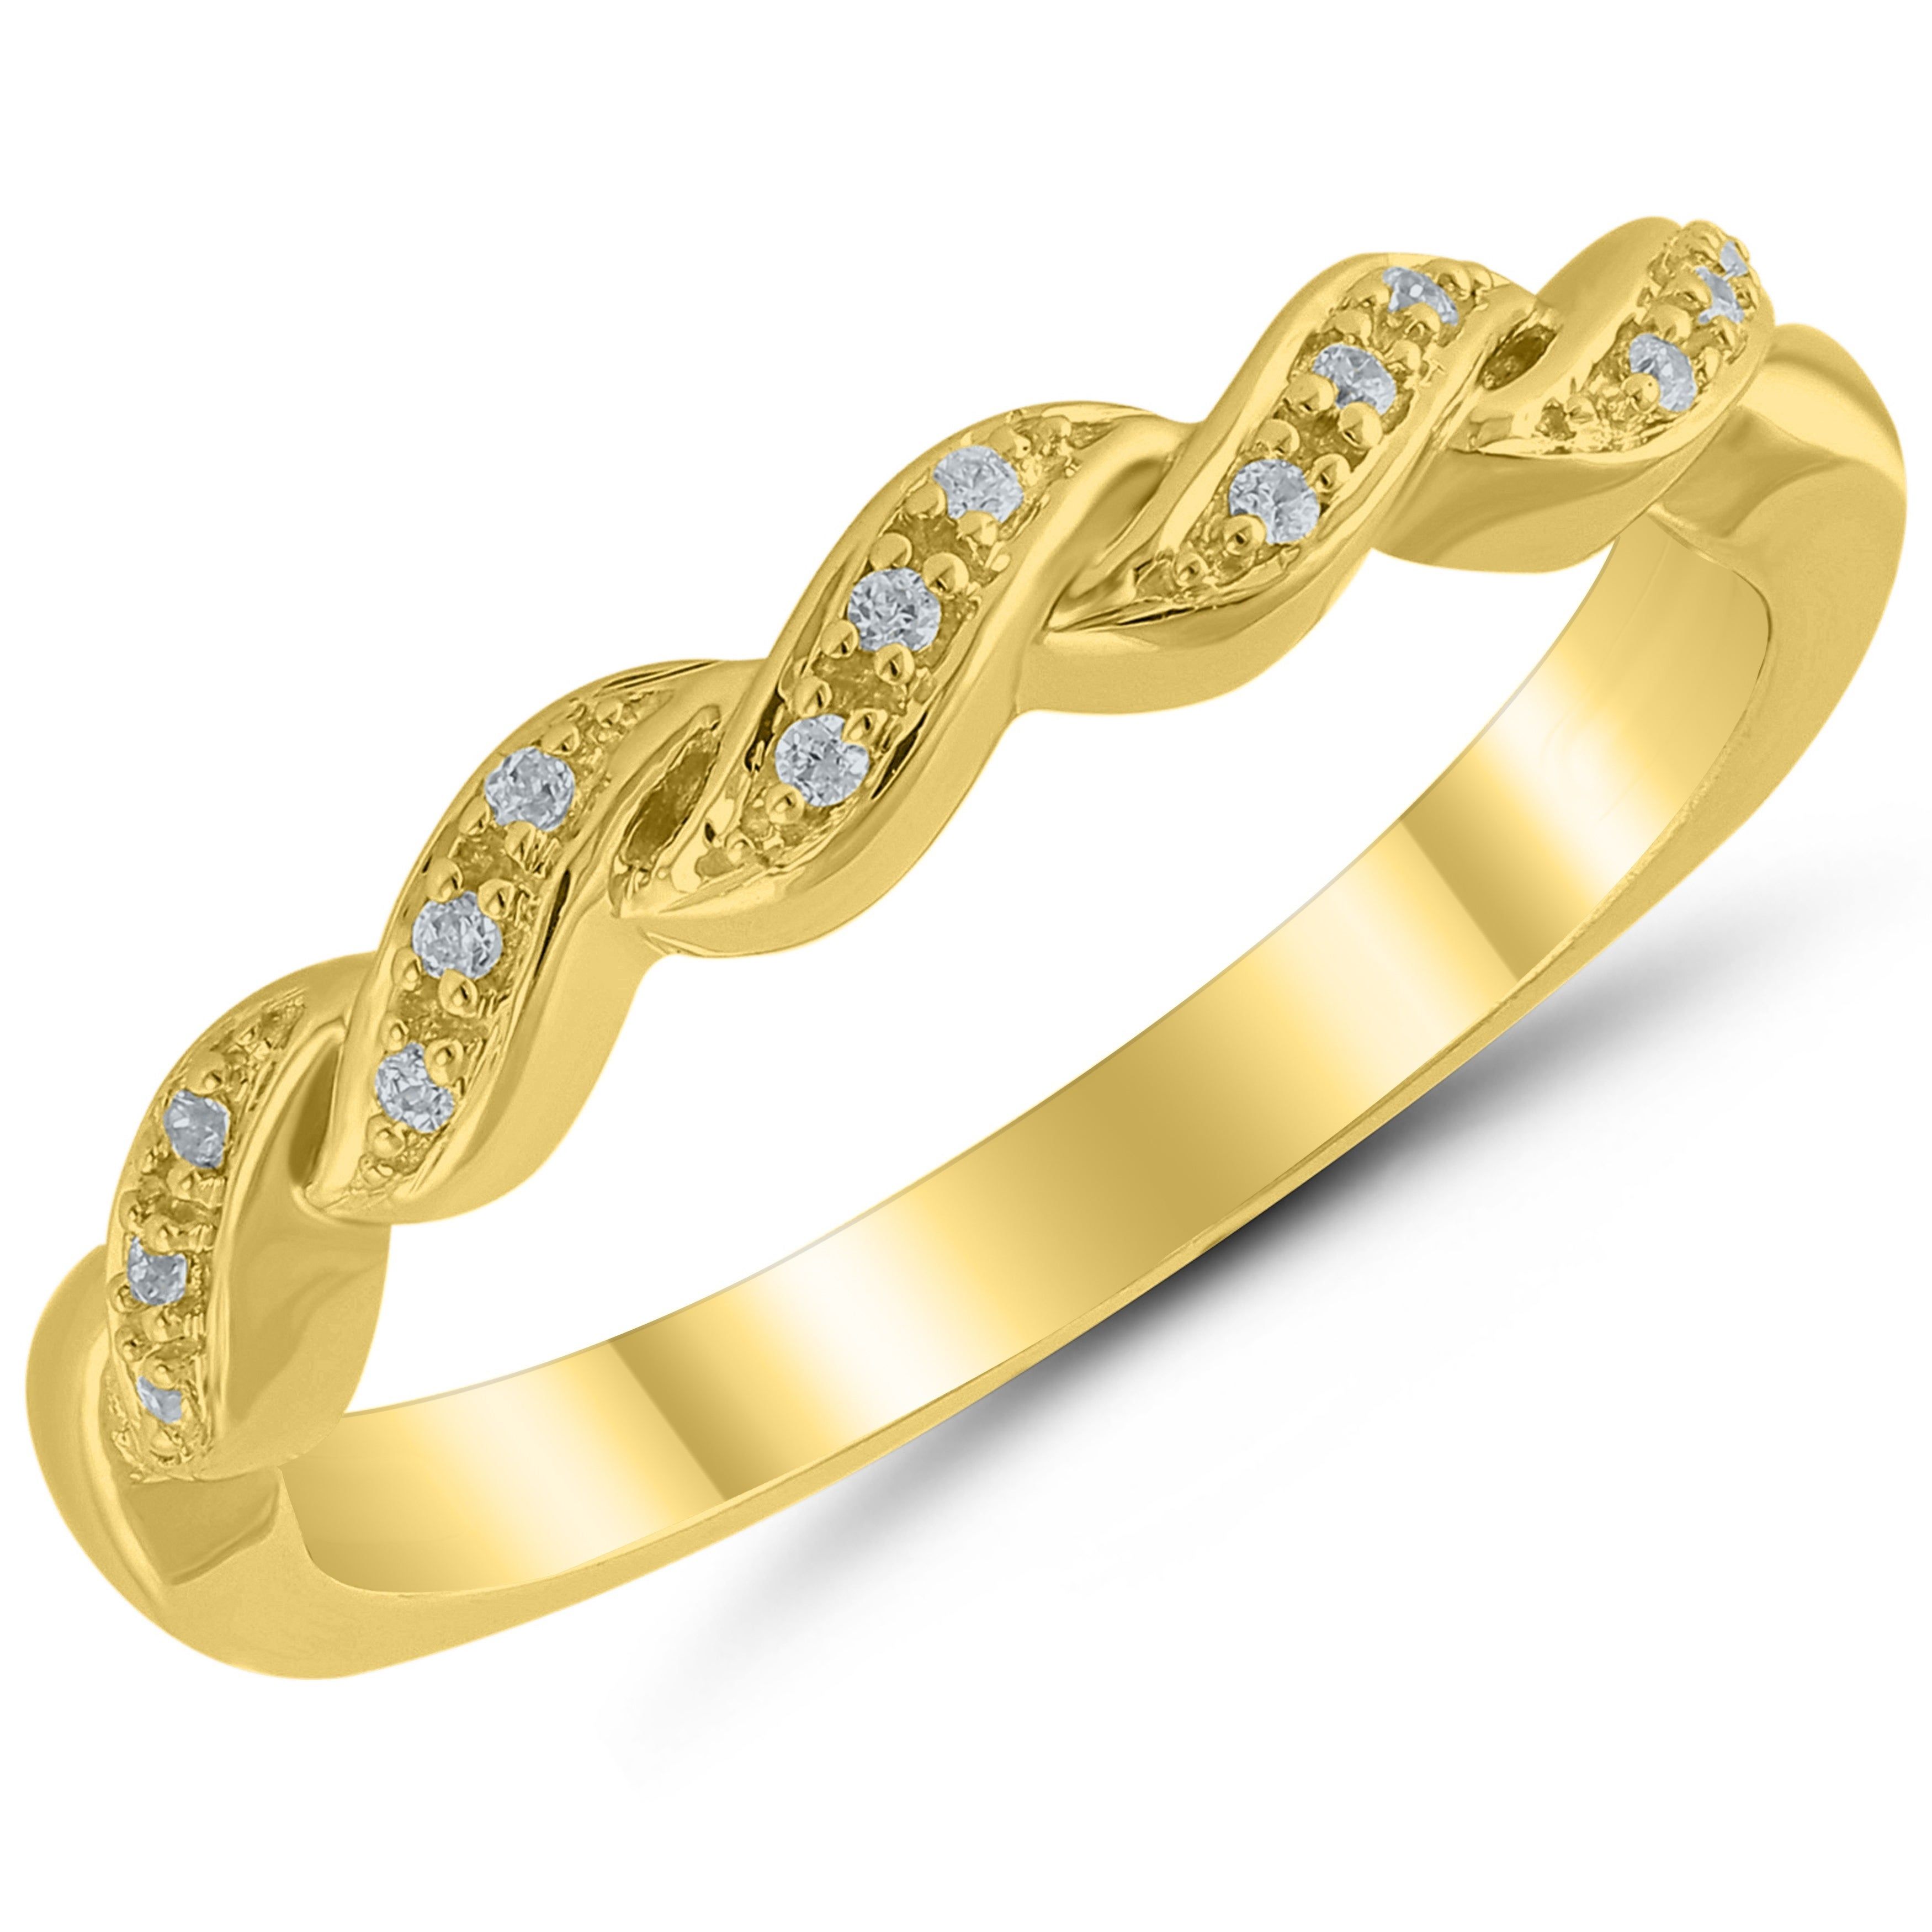 Caressa 10k Yellow Gold Diamond Accent Twist Anniversary Band – White H I Intended For Most Recent Diamond Accent Anniversary Bands In Gold (View 3 of 25)